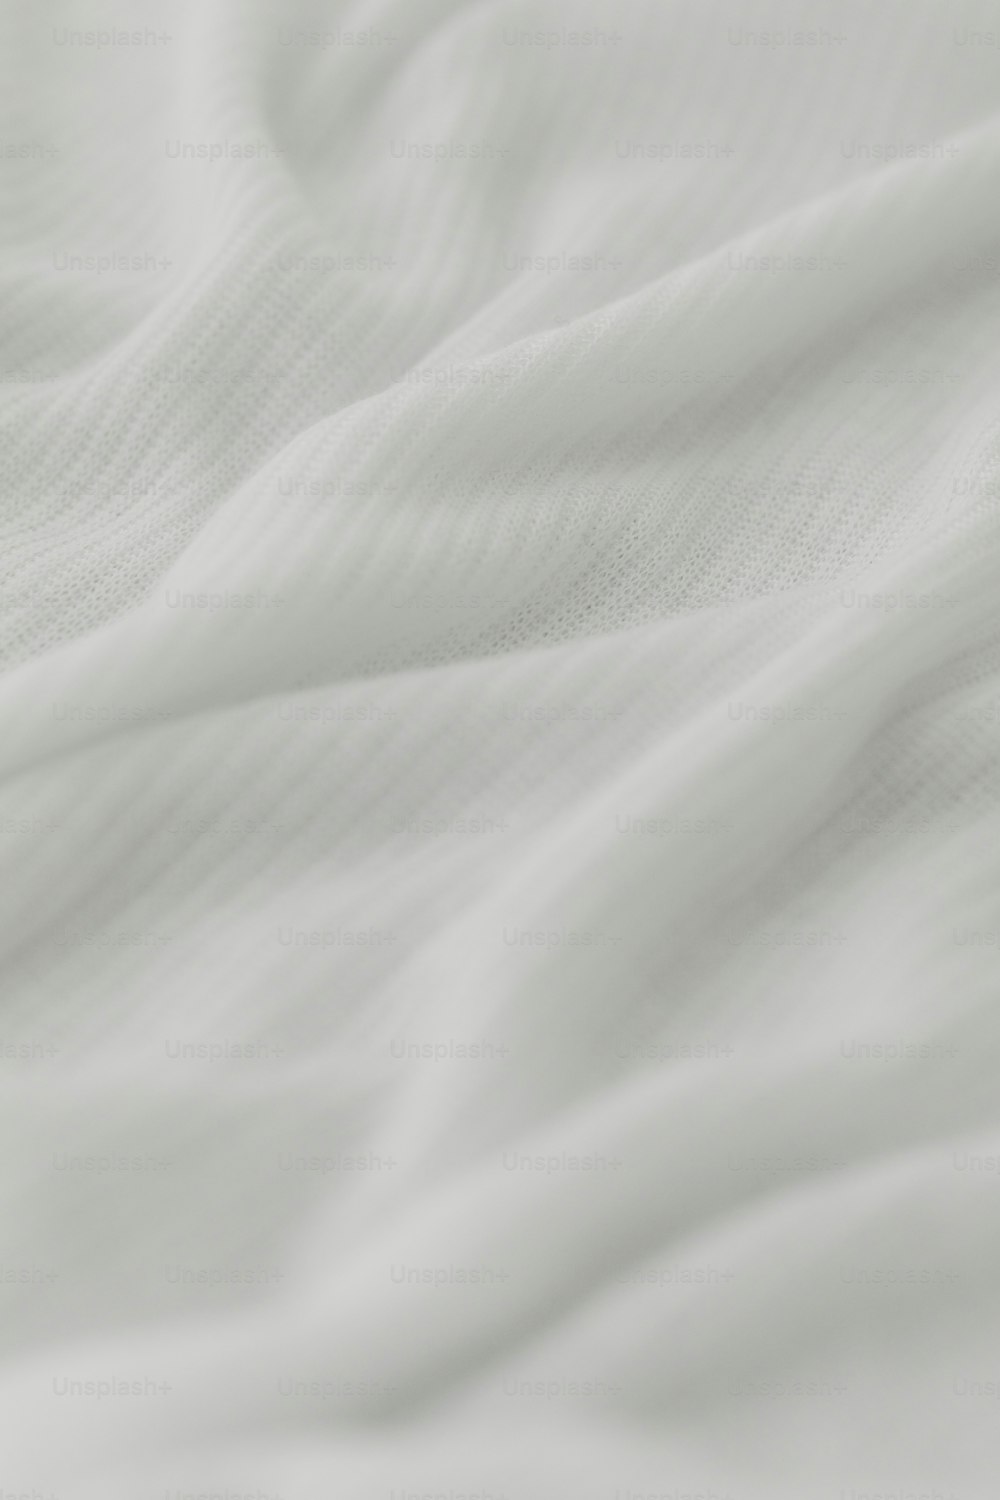 White Cloth Stock Photos, Images and Backgrounds for Free Download